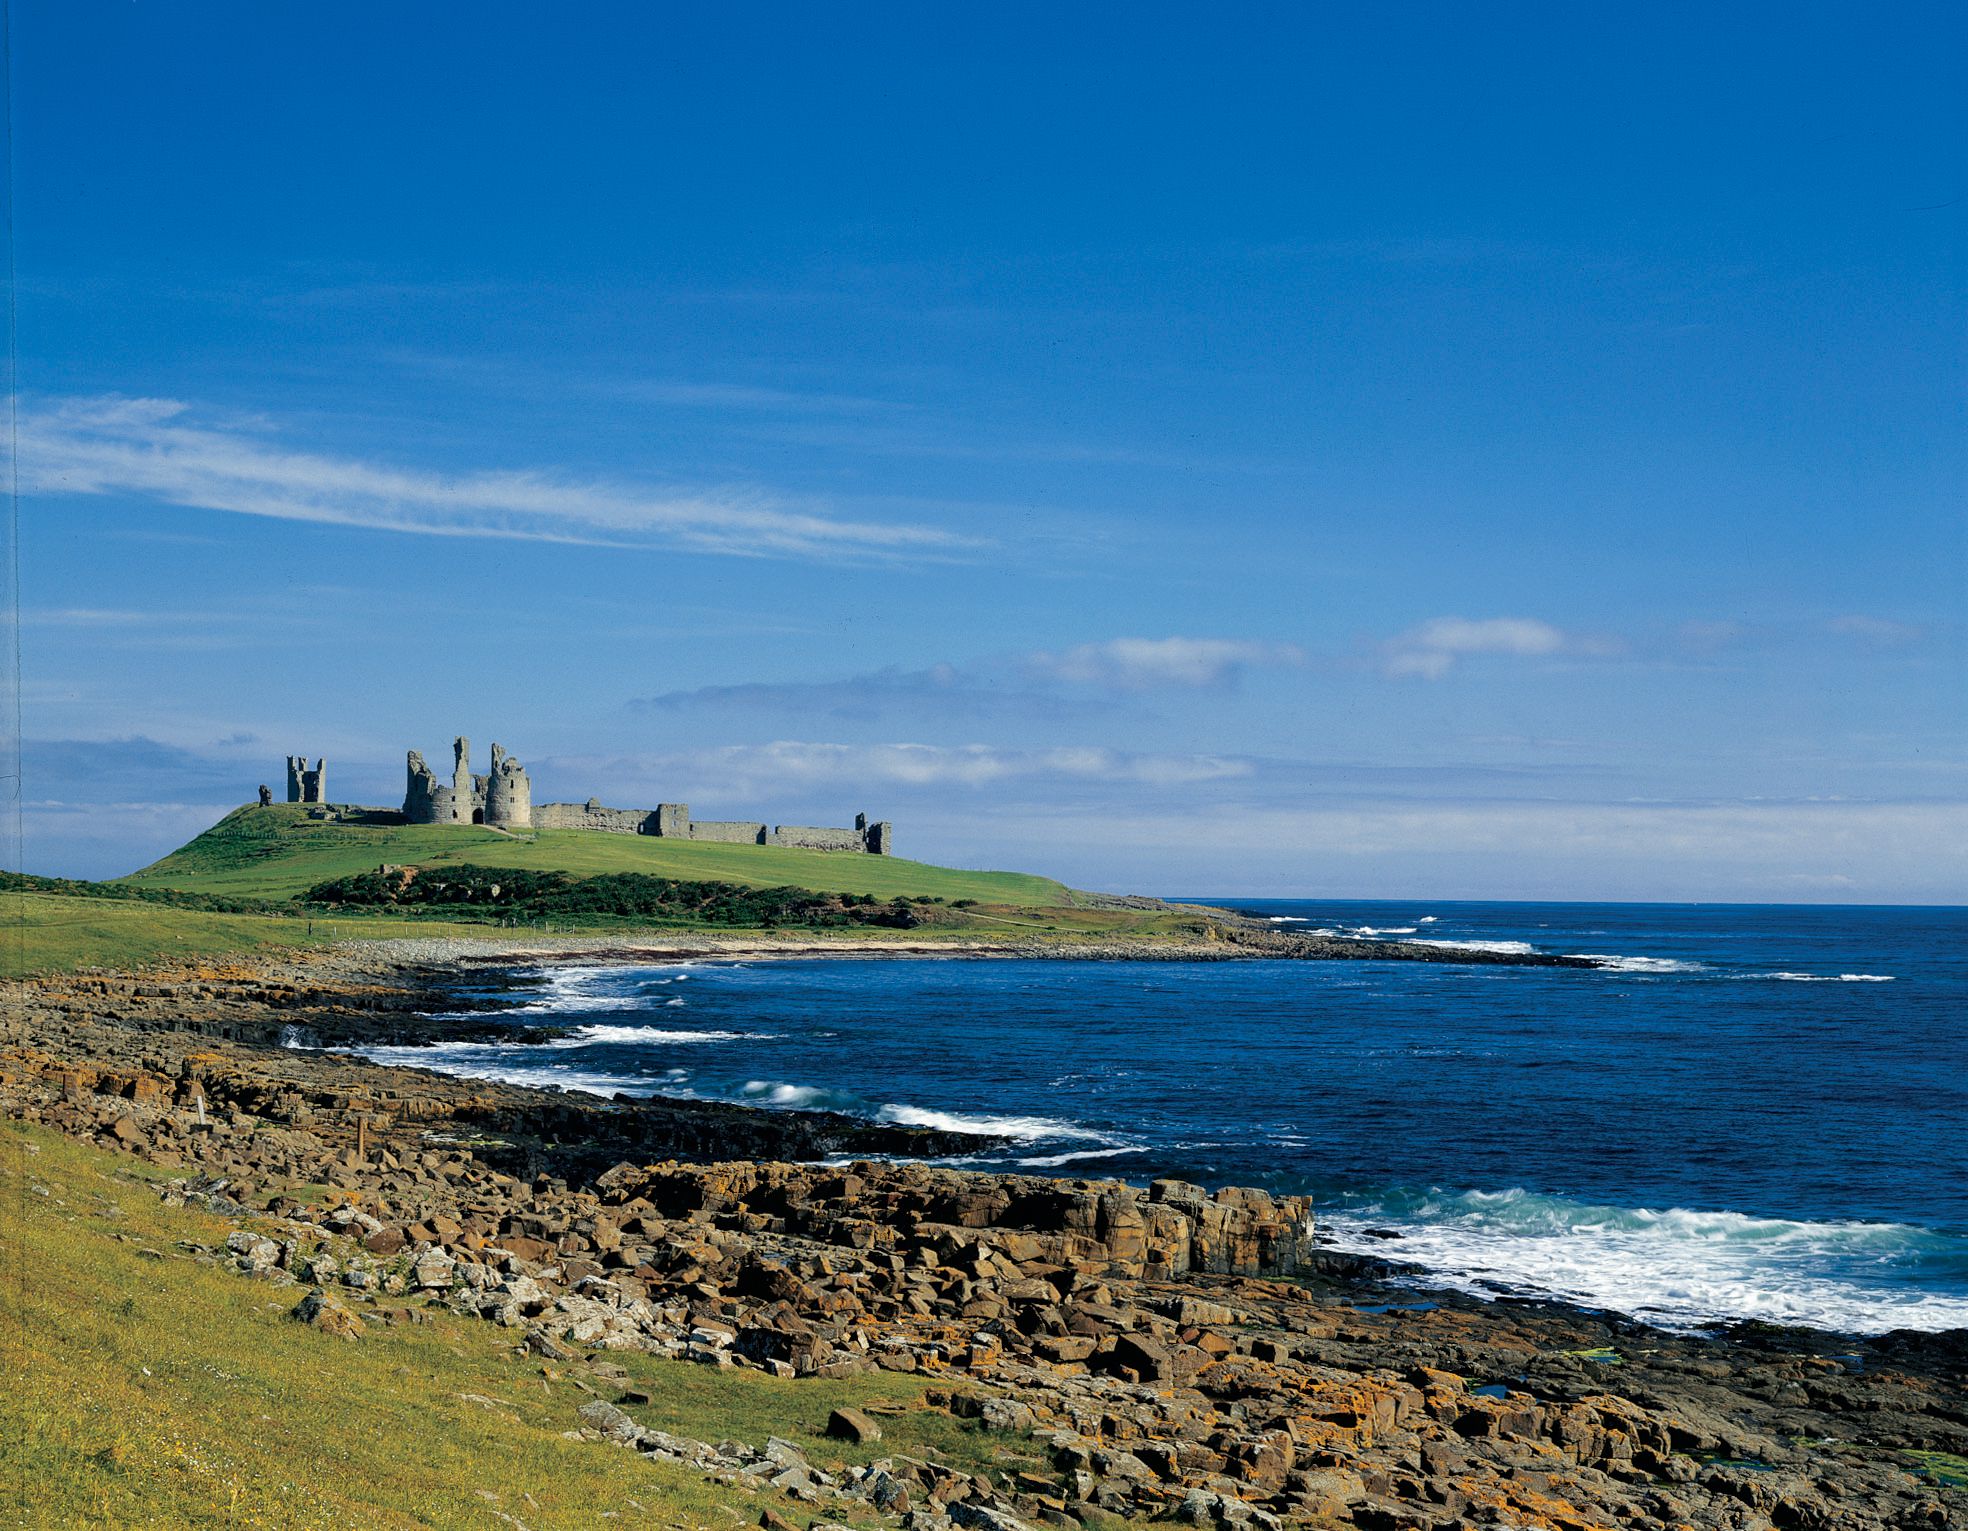 Hotels, Cottages, B&Bs & Glamping in Northumberland